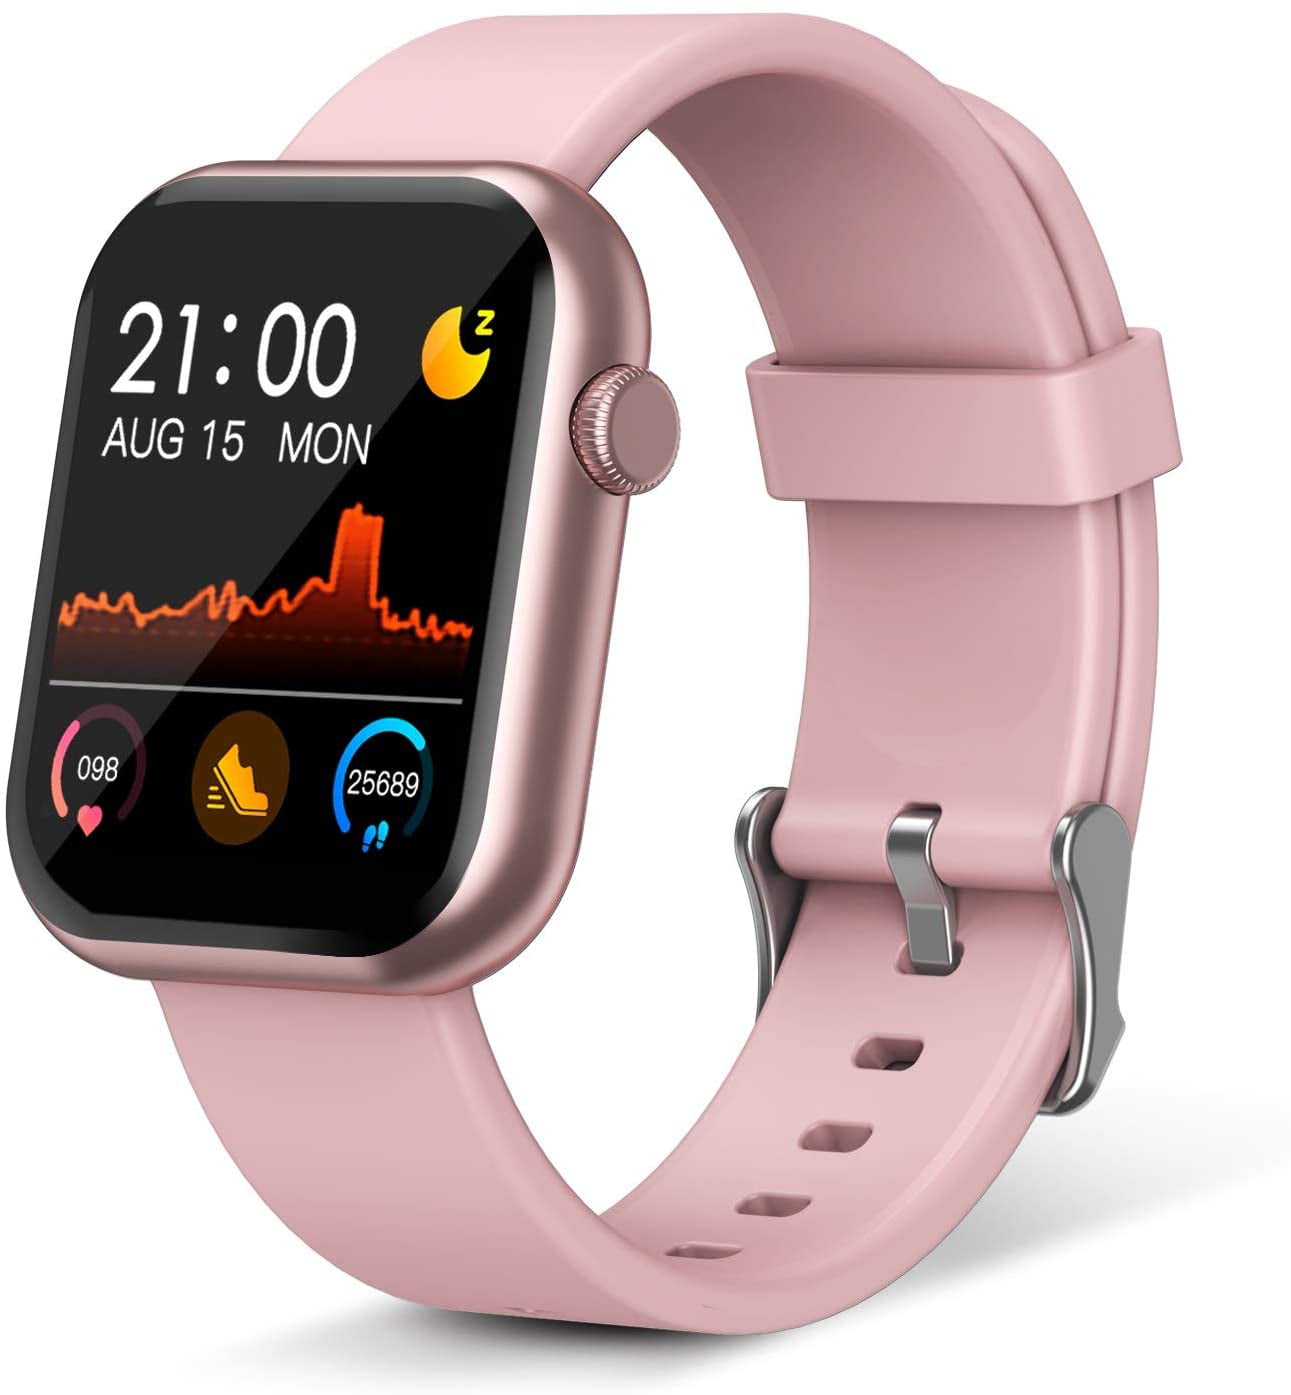 Smart Watch,Fitness Tracker with Heart Rate Monitor,IP67 Waterproof